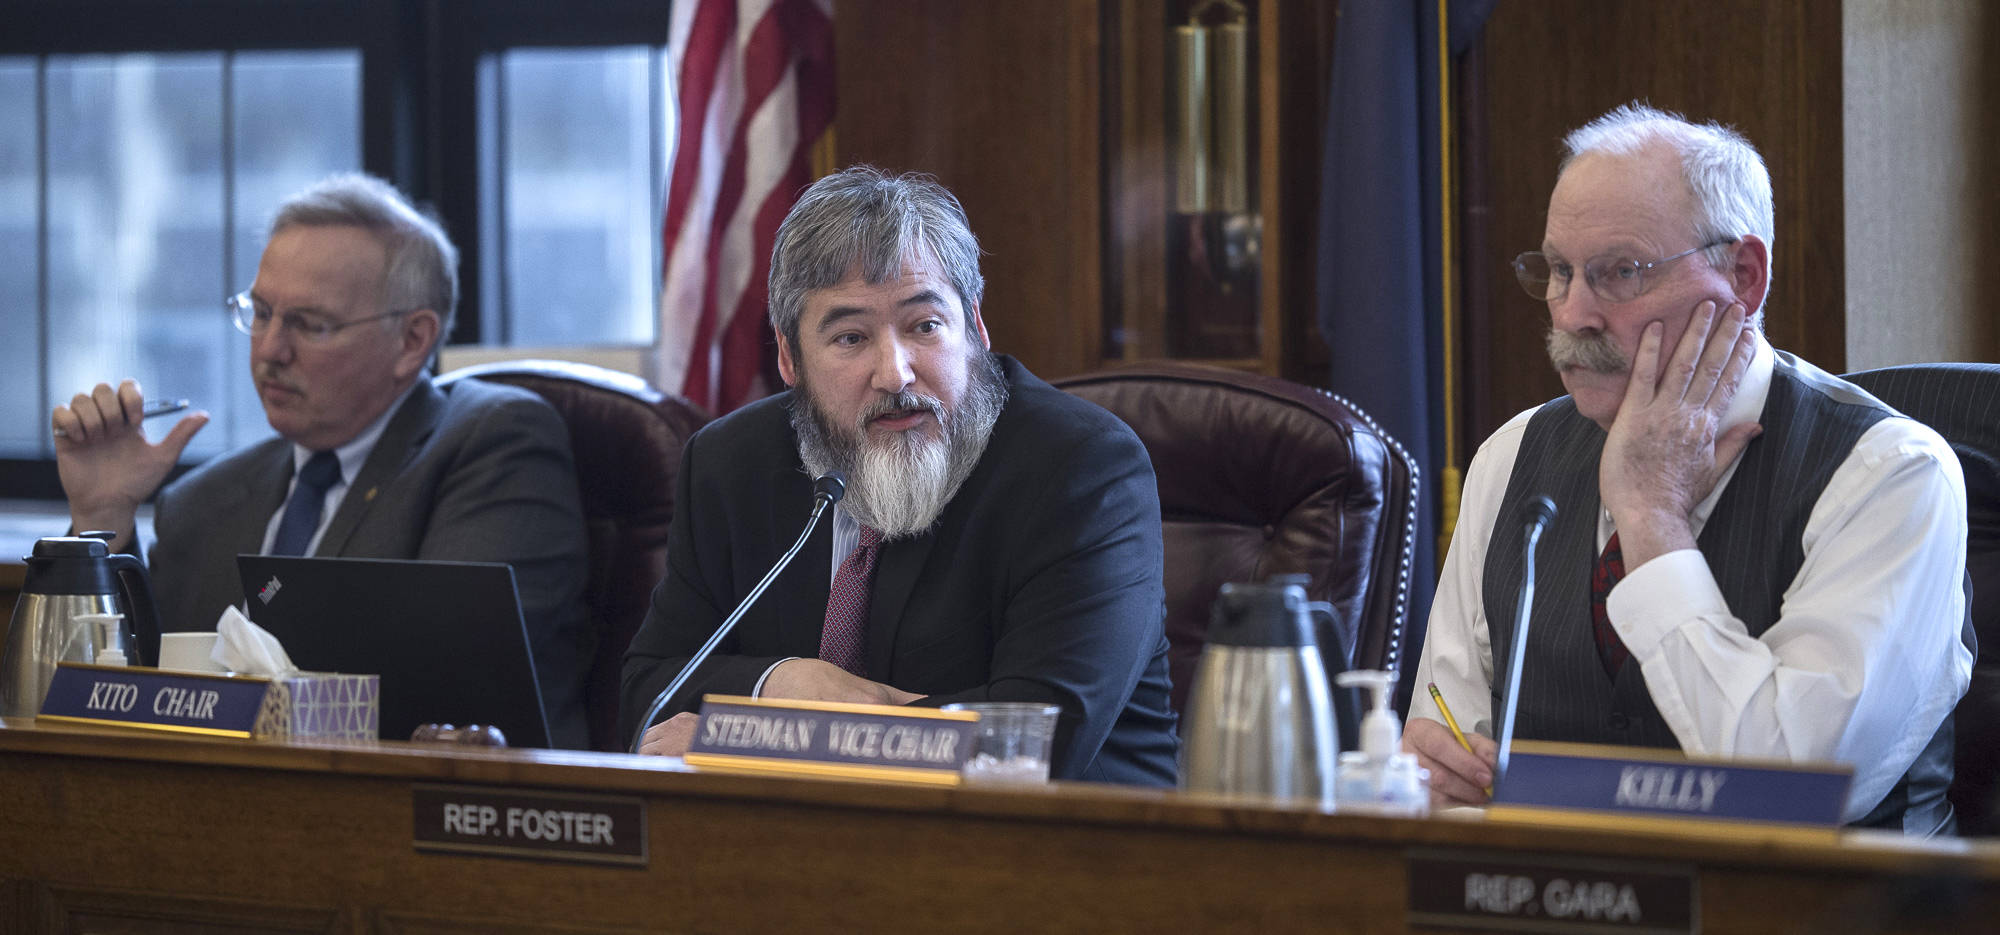 Rep. Sam Kito III, D-Juneau, chair of the Legislative Council Committee, asks for a cut to lawmaker per diem payments by 75 percent at the Capitol on Monday, April 23, 2018. (Michael Penn | Juneau Empire)